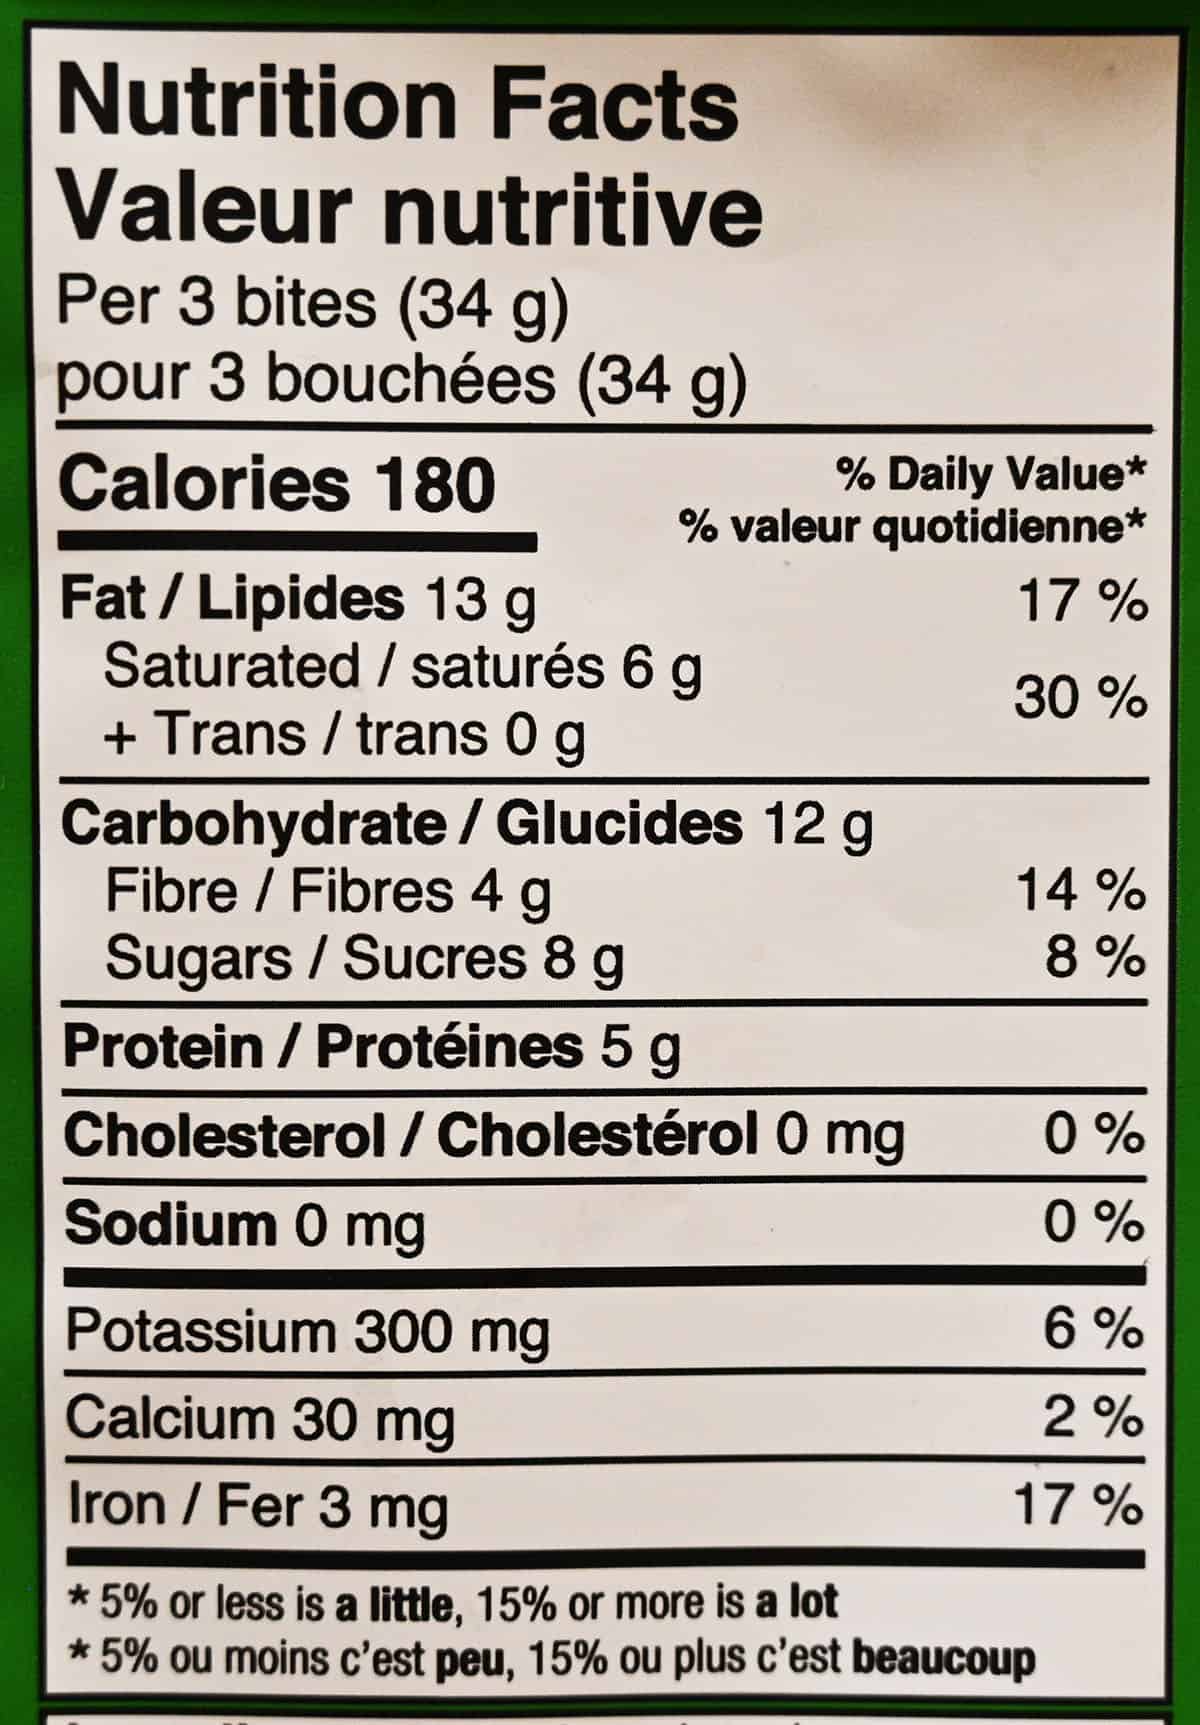 Nutrition facts from the back of the bag.